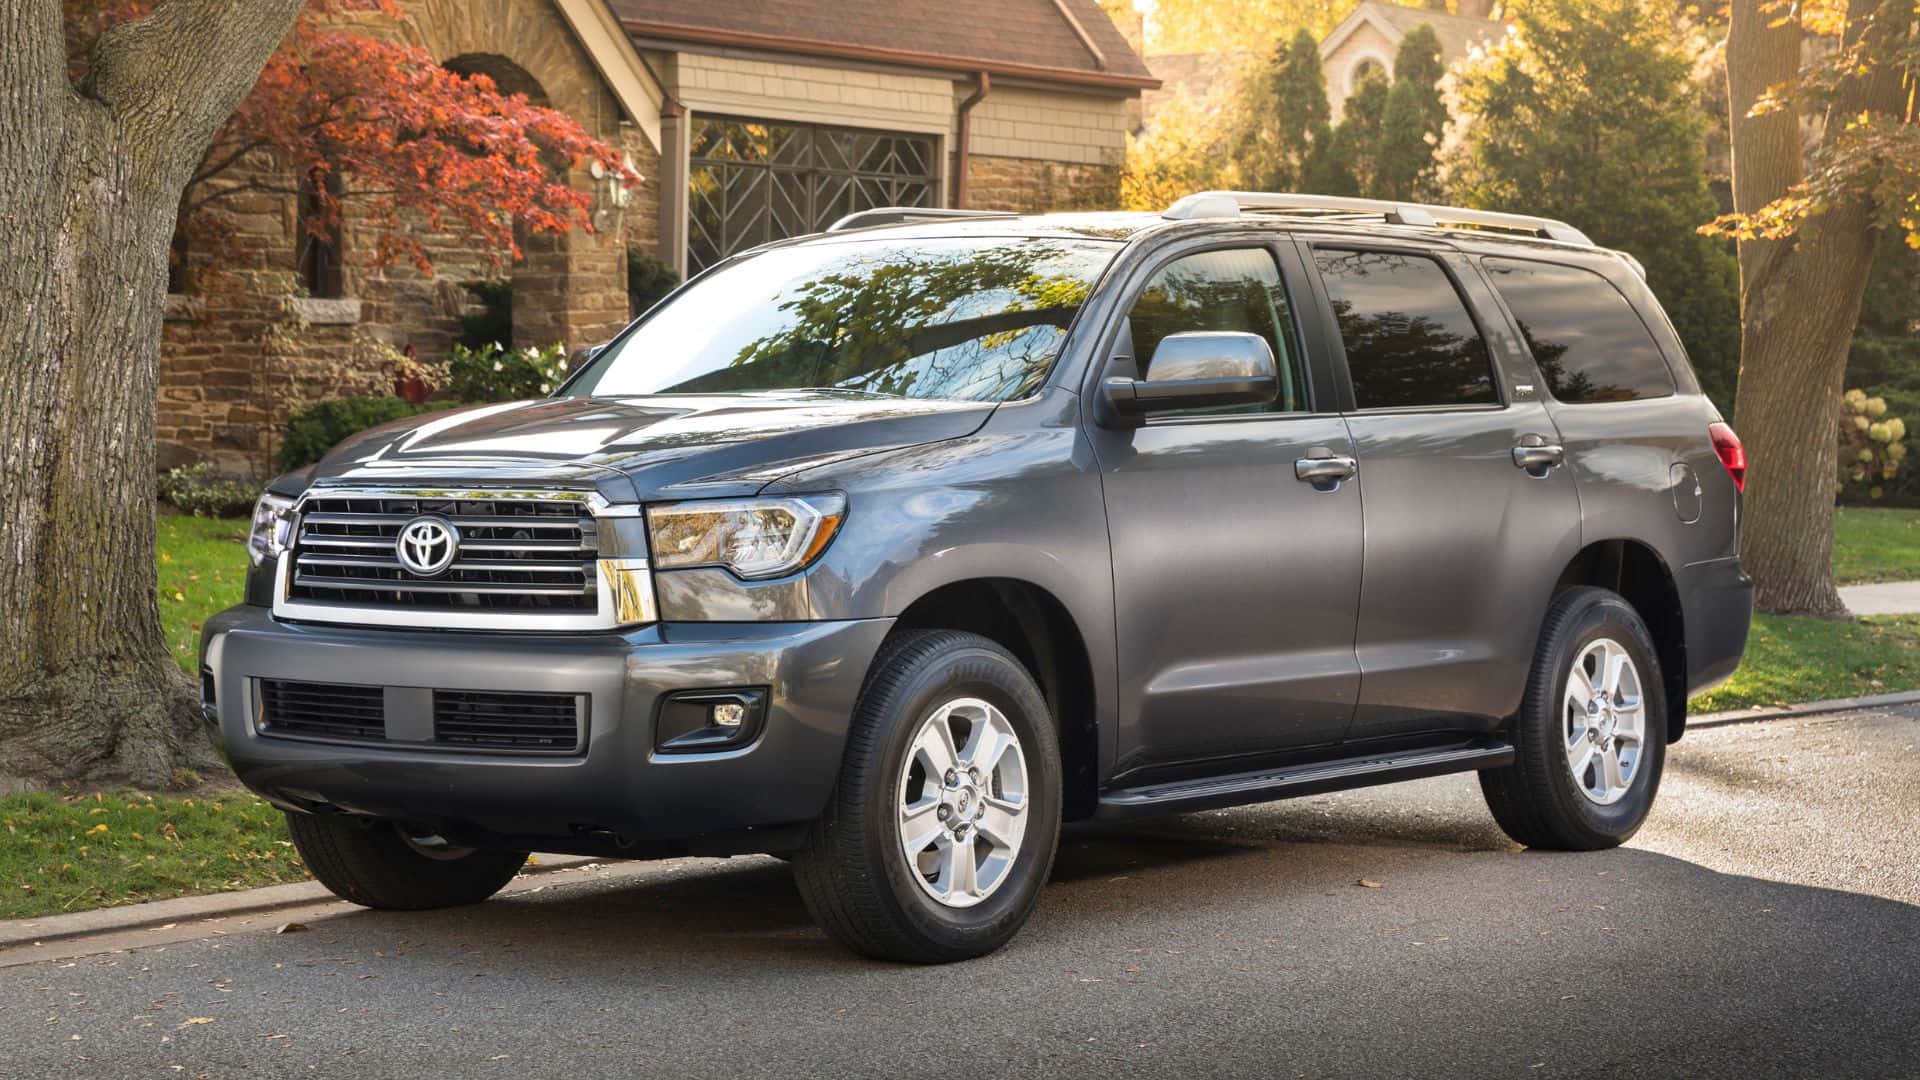 Caption: A Glorious Drive With Toyota Sequoia Wallpaper